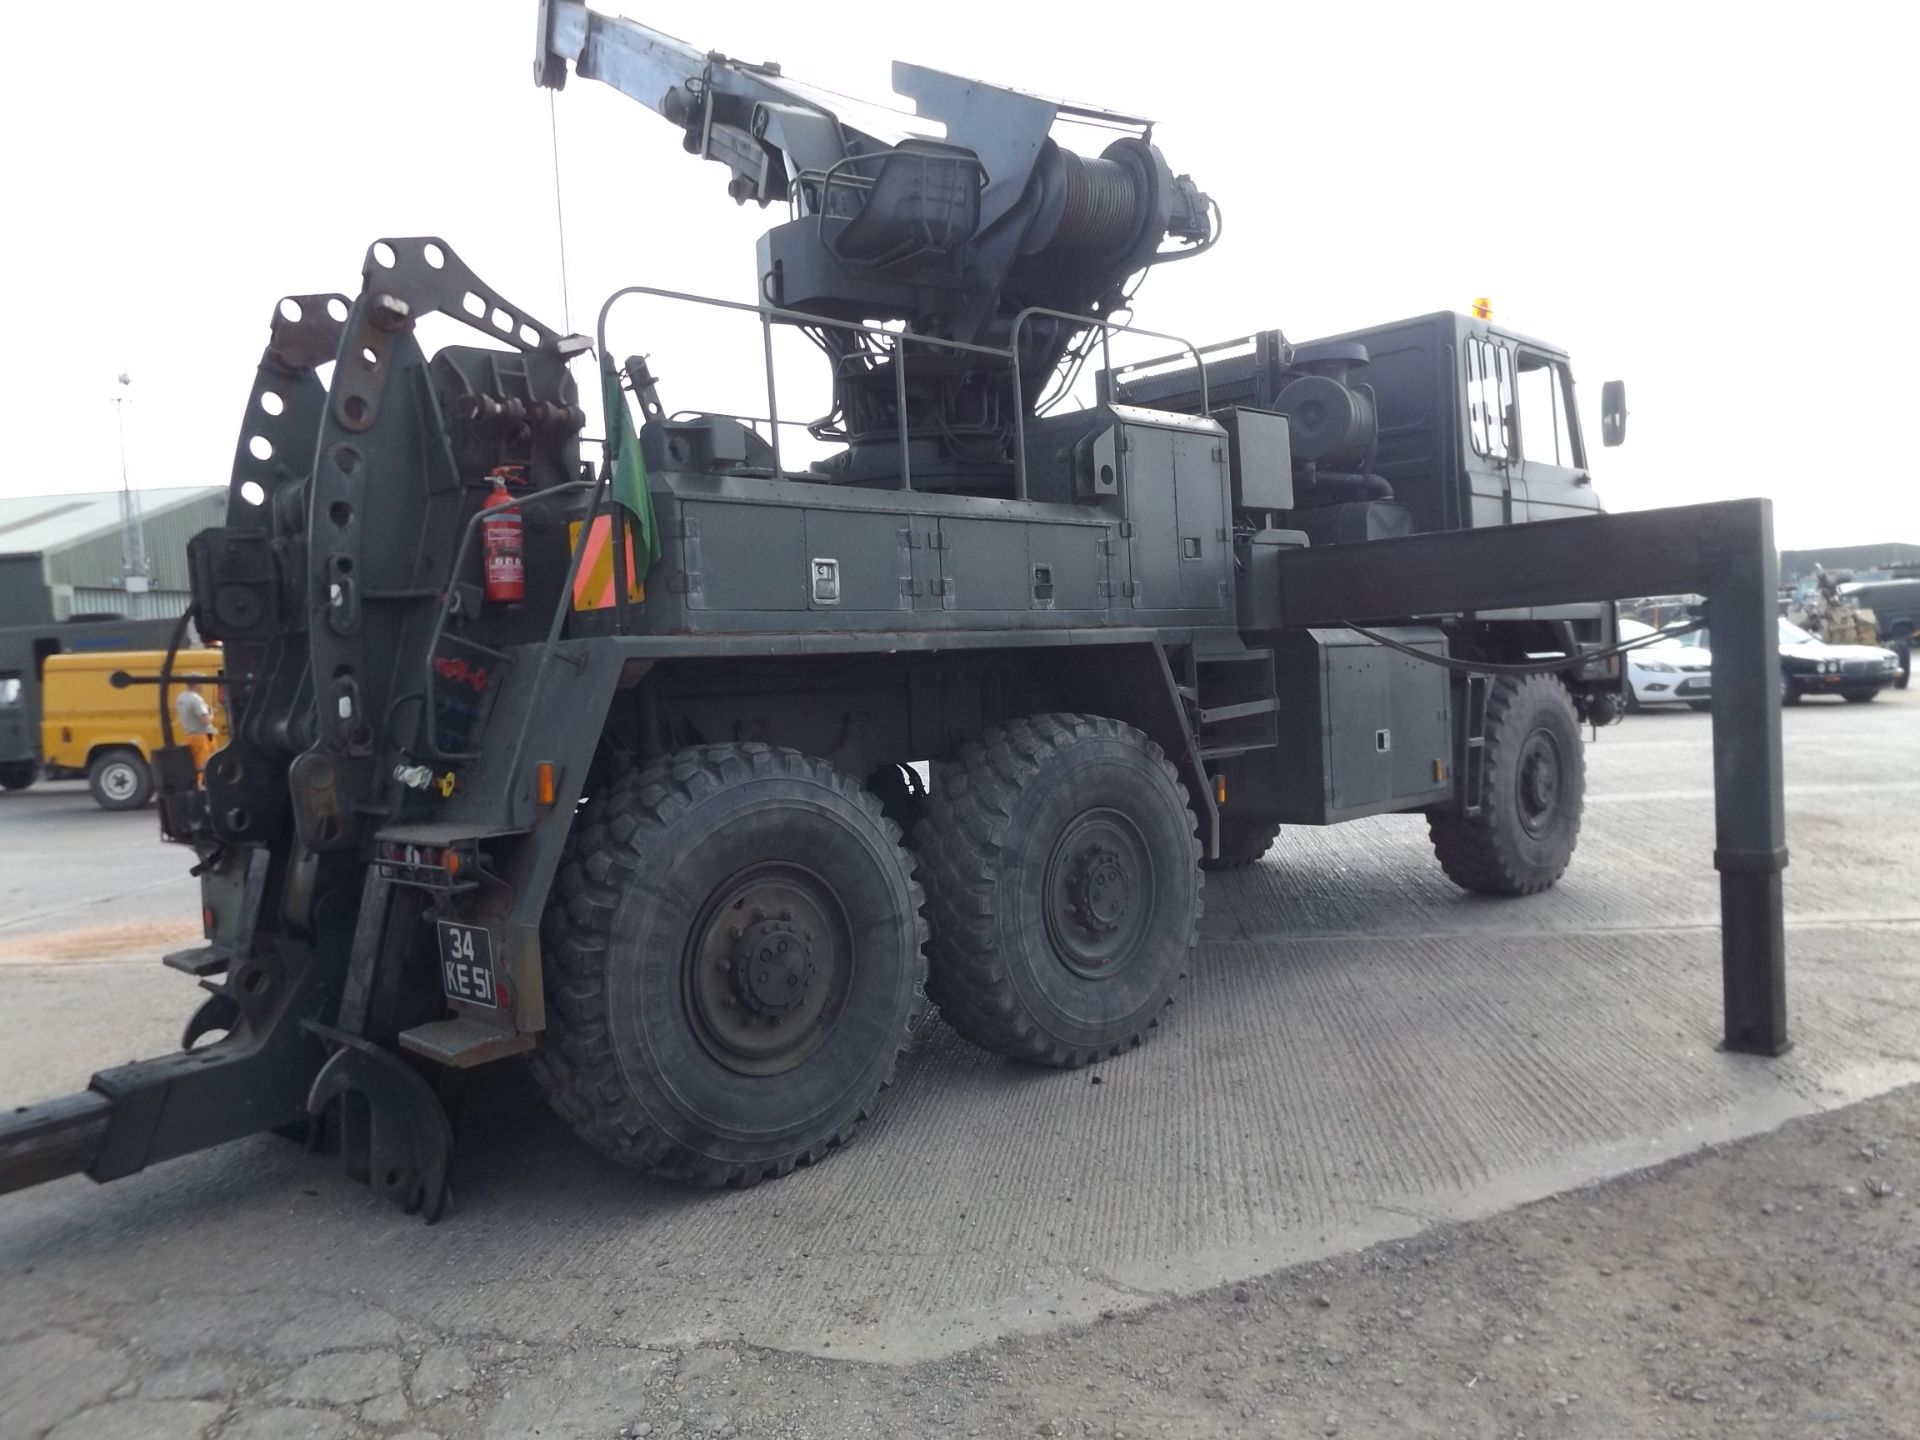 Foden 6x6 Recovery Vehicle which is Complete with Remotes and EKA Recovery Tools - Image 7 of 27